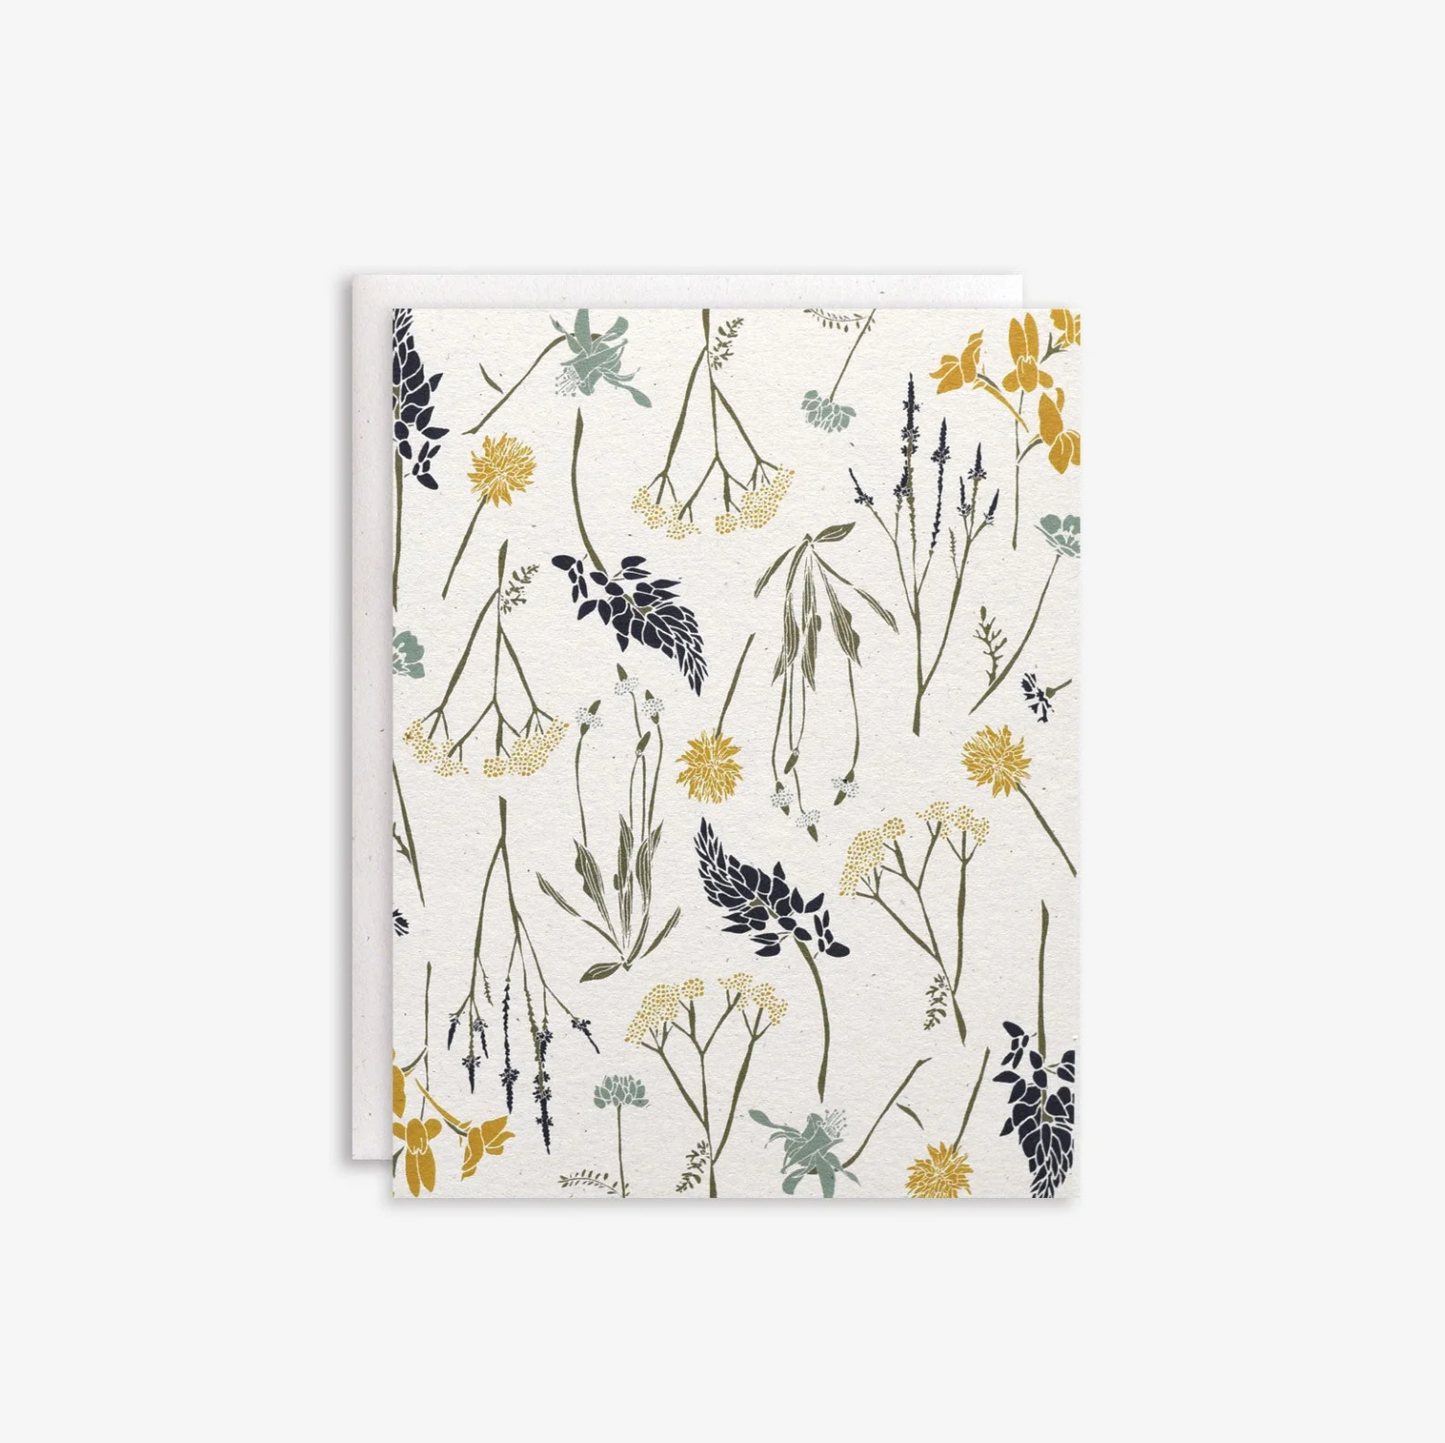 Wildflowers by Region Cards Boxed Set